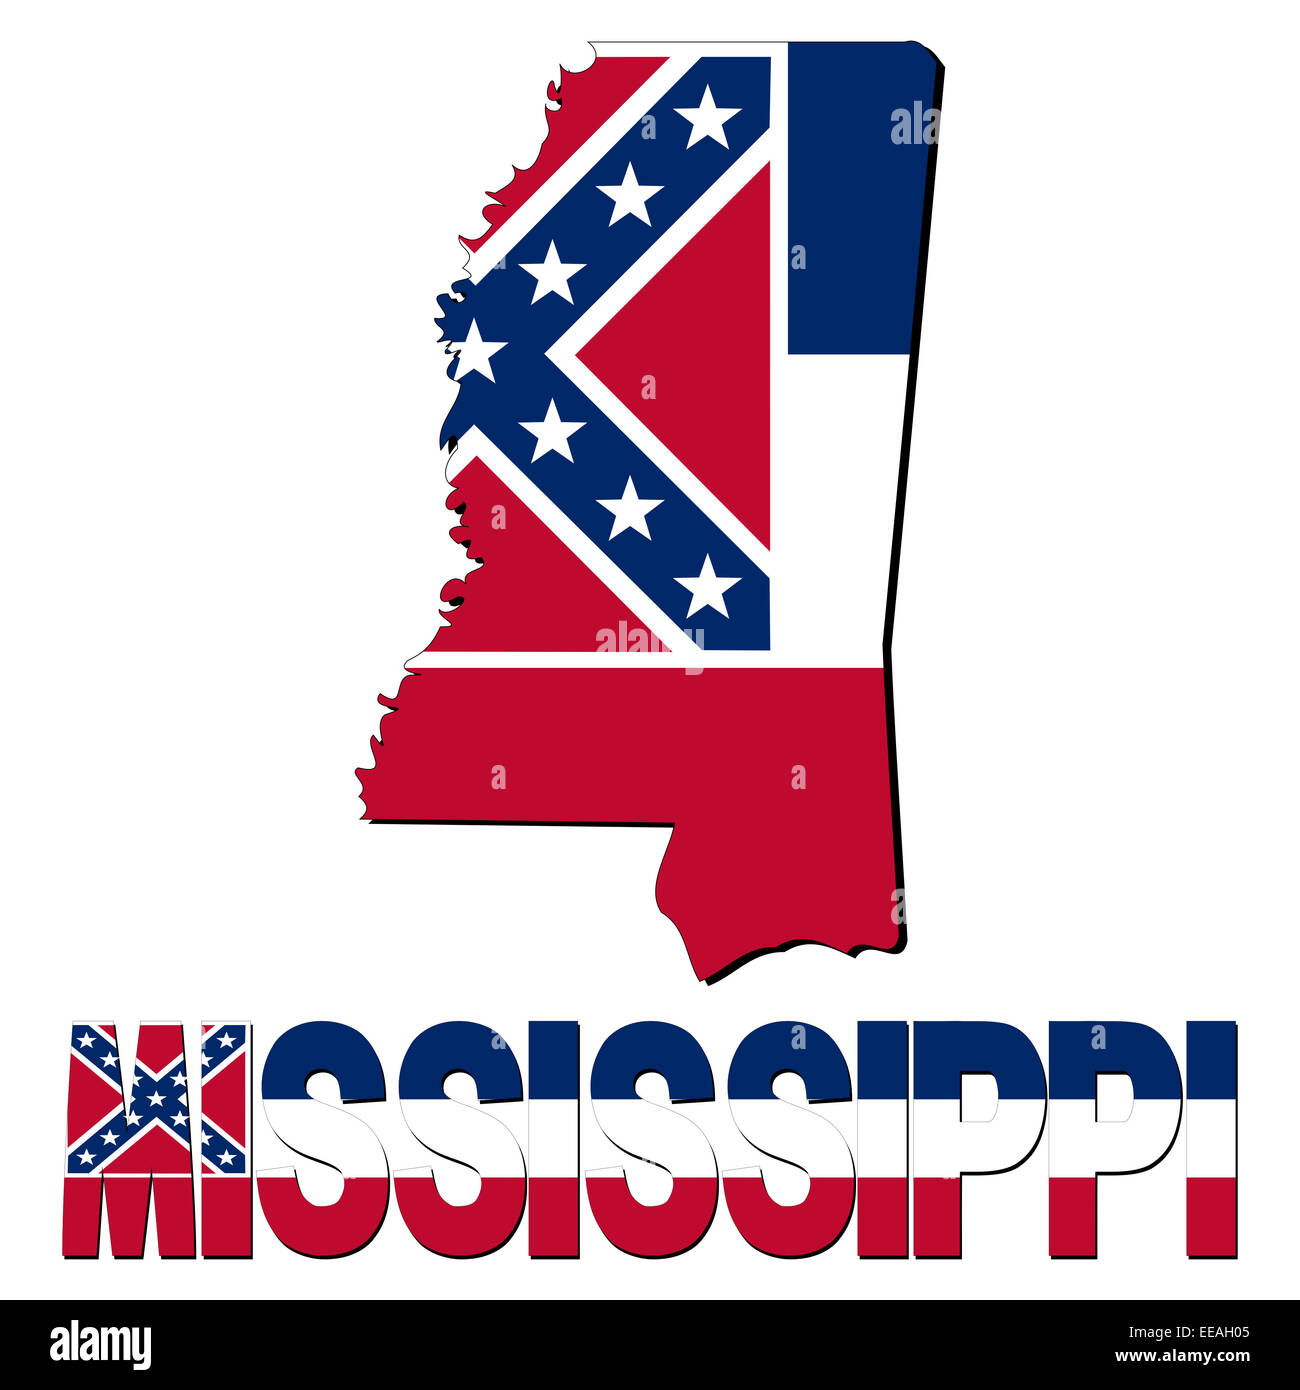 Mississippi map flag and text illustration Stock Photo